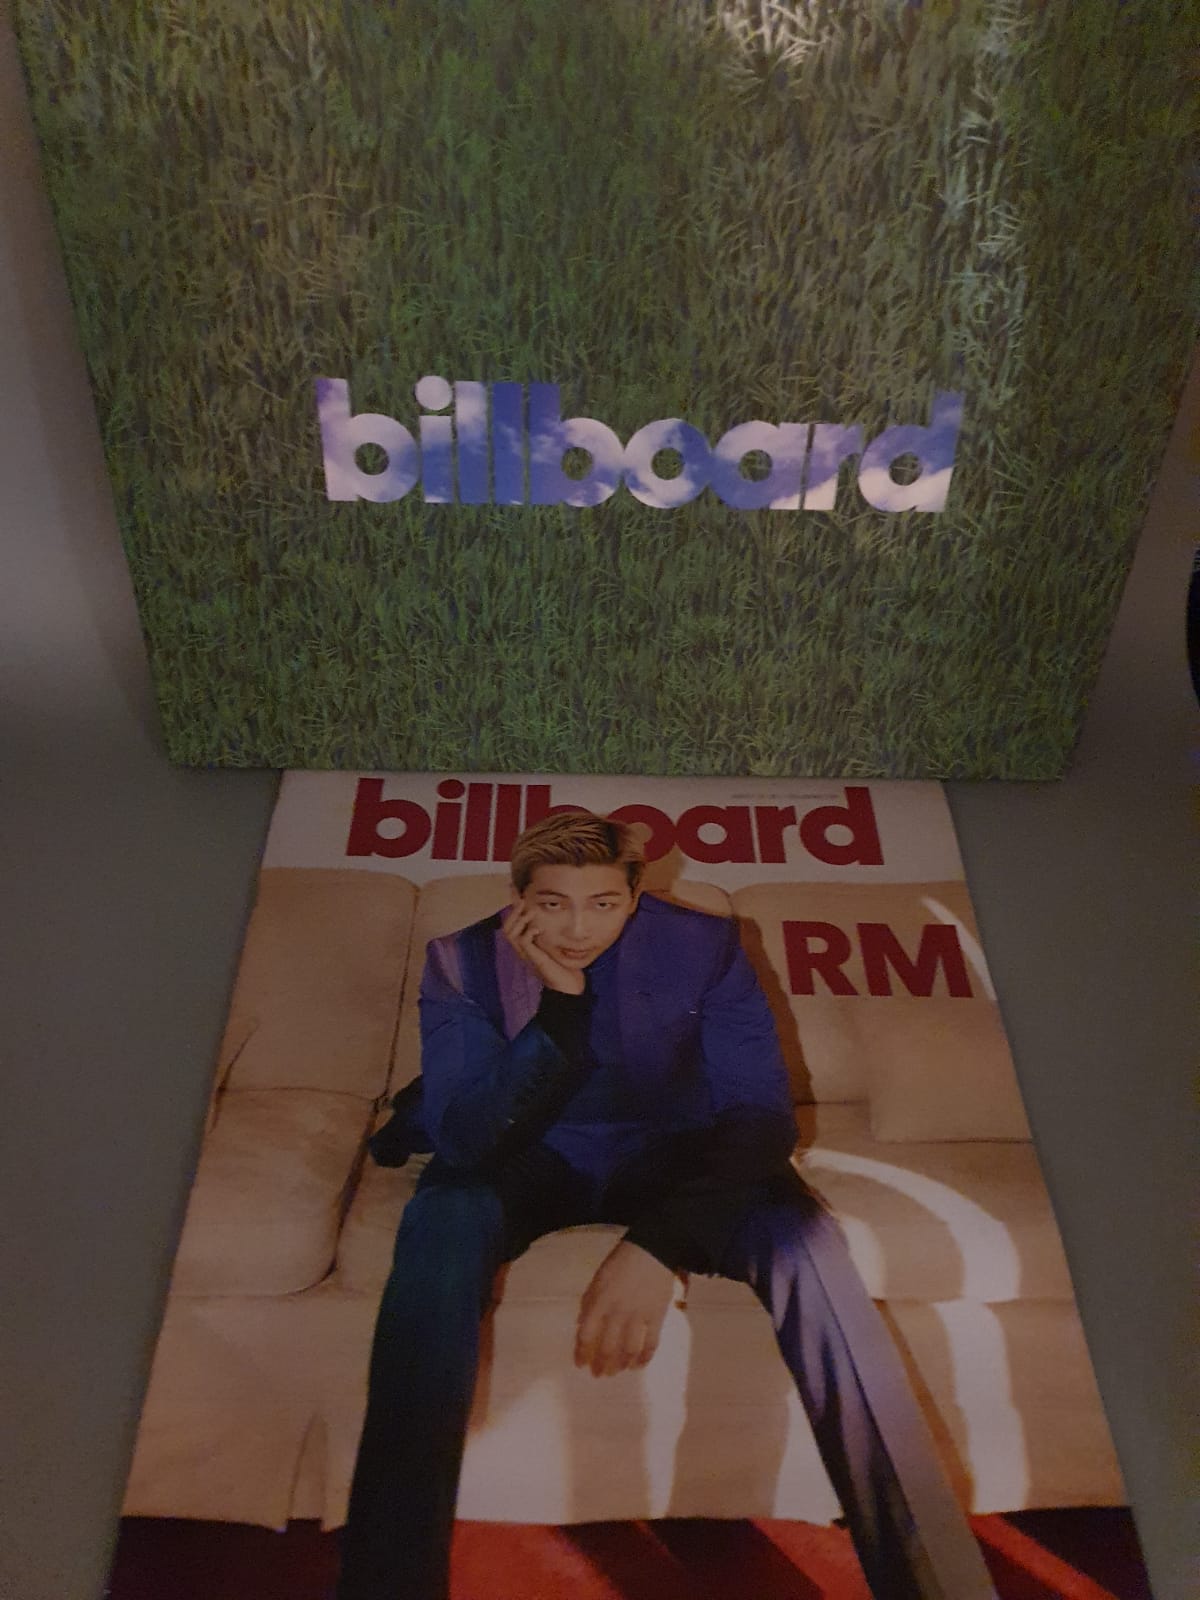 Billboard 2021 Limited Edition Collector’s Box Set featuring BTS